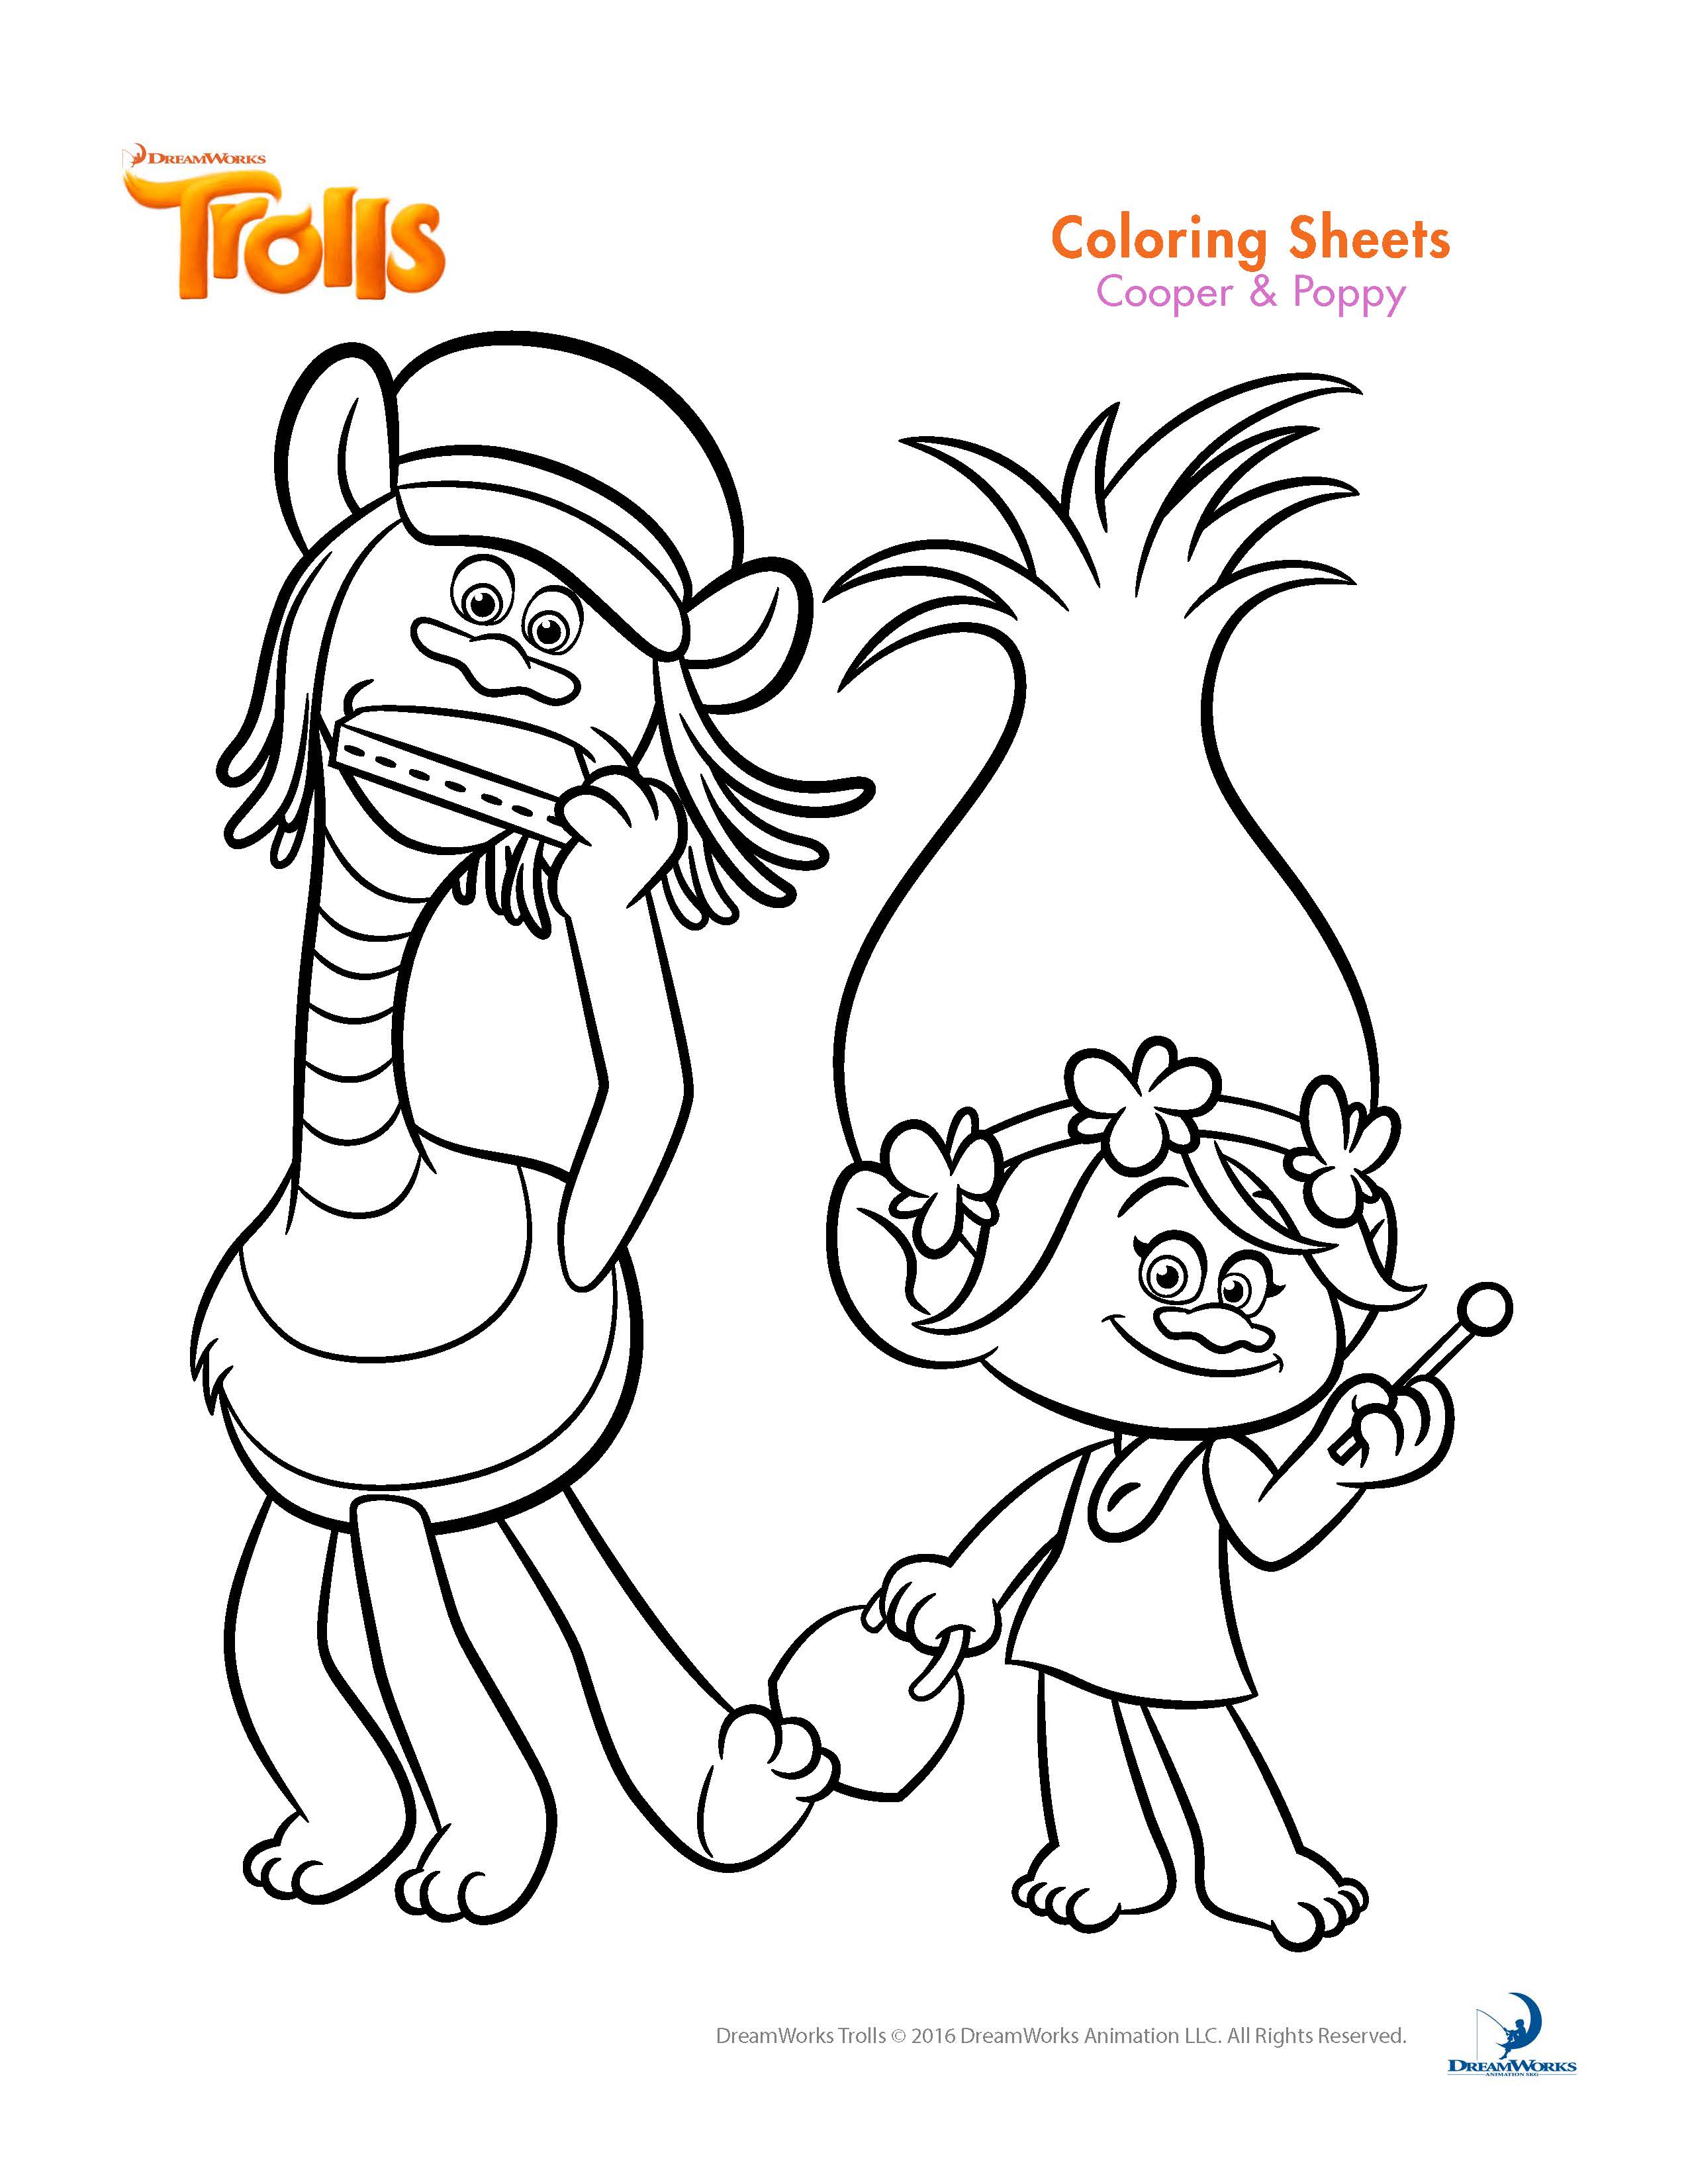 Incredible Trolls coloring page to print and color for free